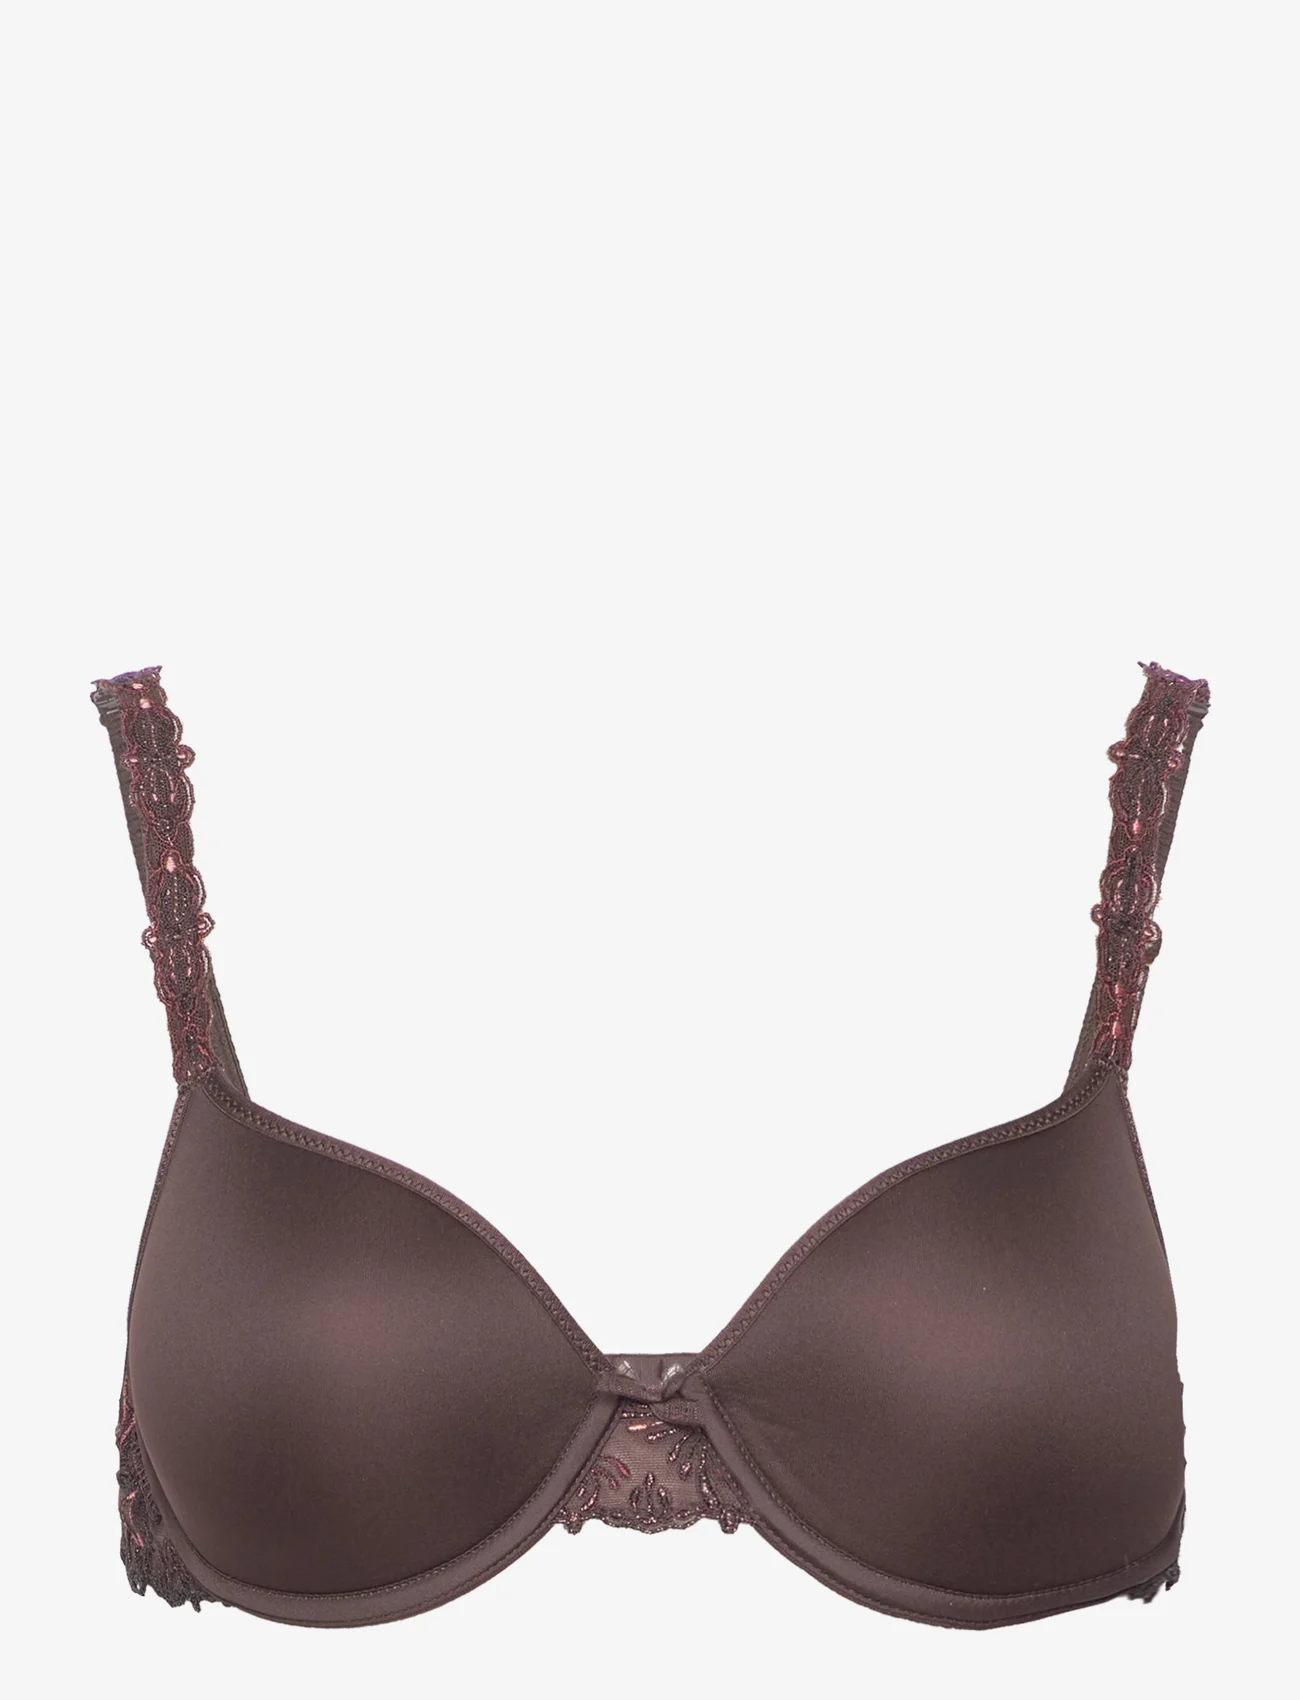 CHANTELLE - Champs Elysees Covering Memory Bra - t-shirts bras - glossy brown - 0